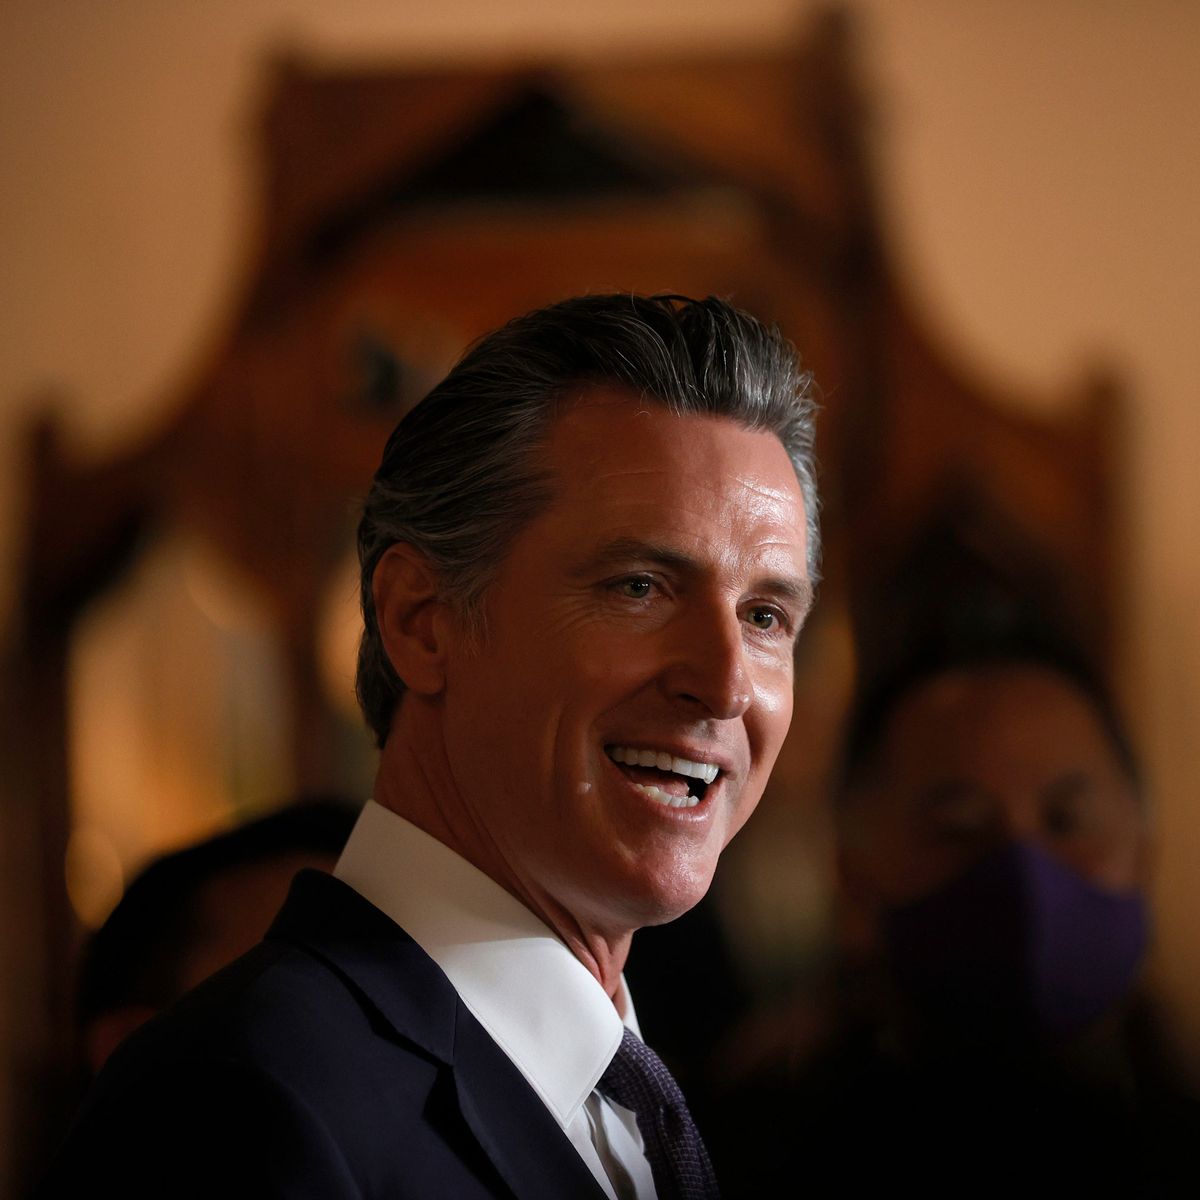 A Bad Gavin Newsom Poll May Have Mobilized Recall Opponents